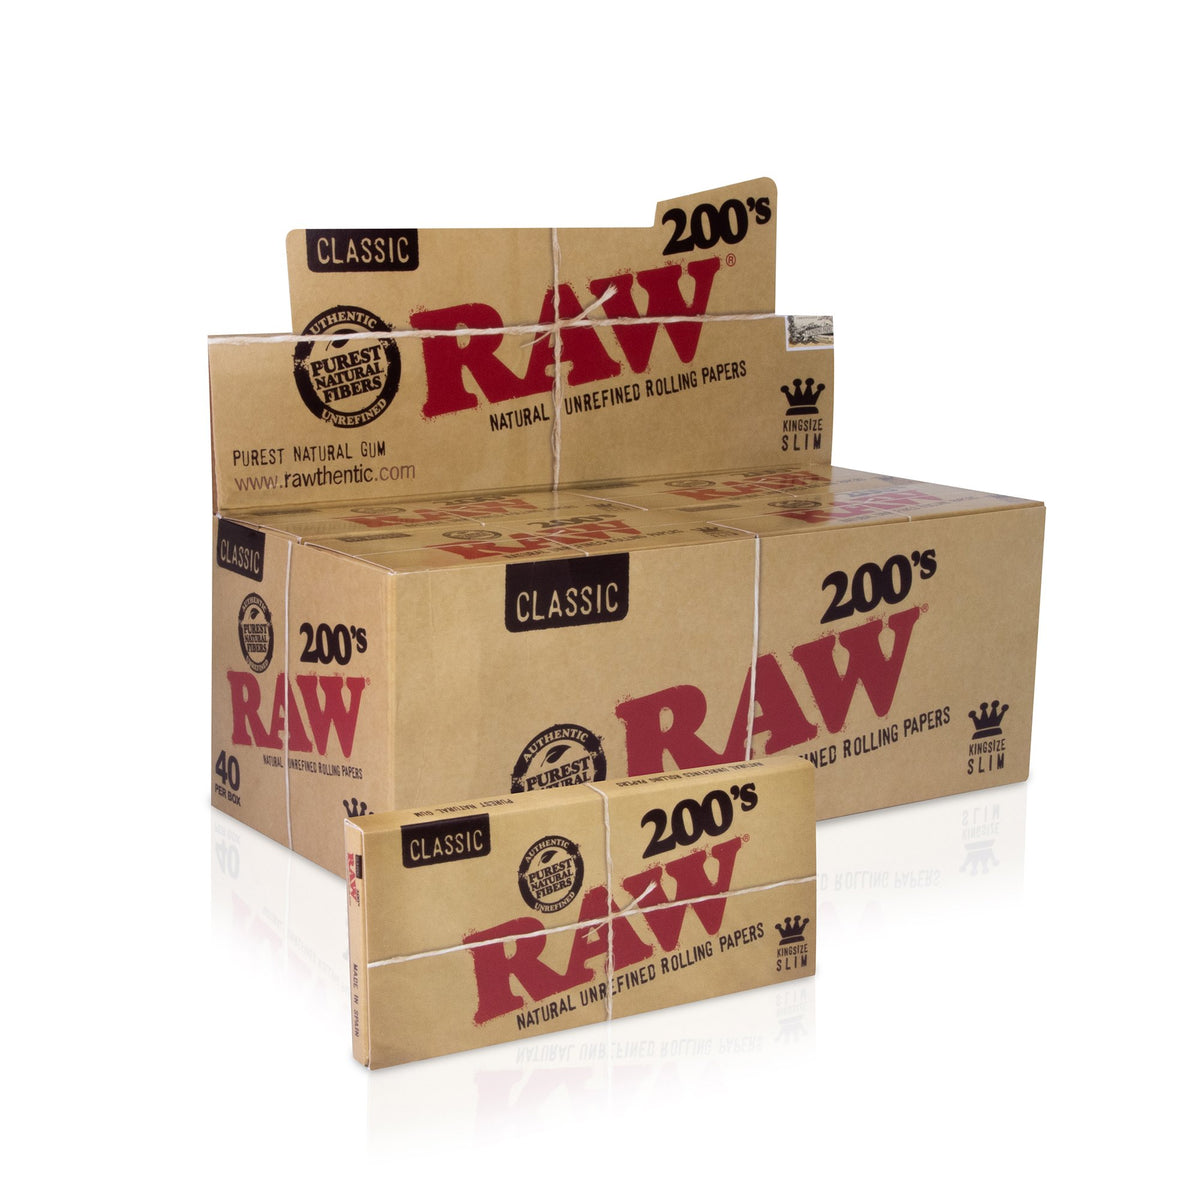 RAW Classic Creaseless King Size Slim Rolling Papers - 200 Rolling Papers WAR00325-MUSA01 esd-official